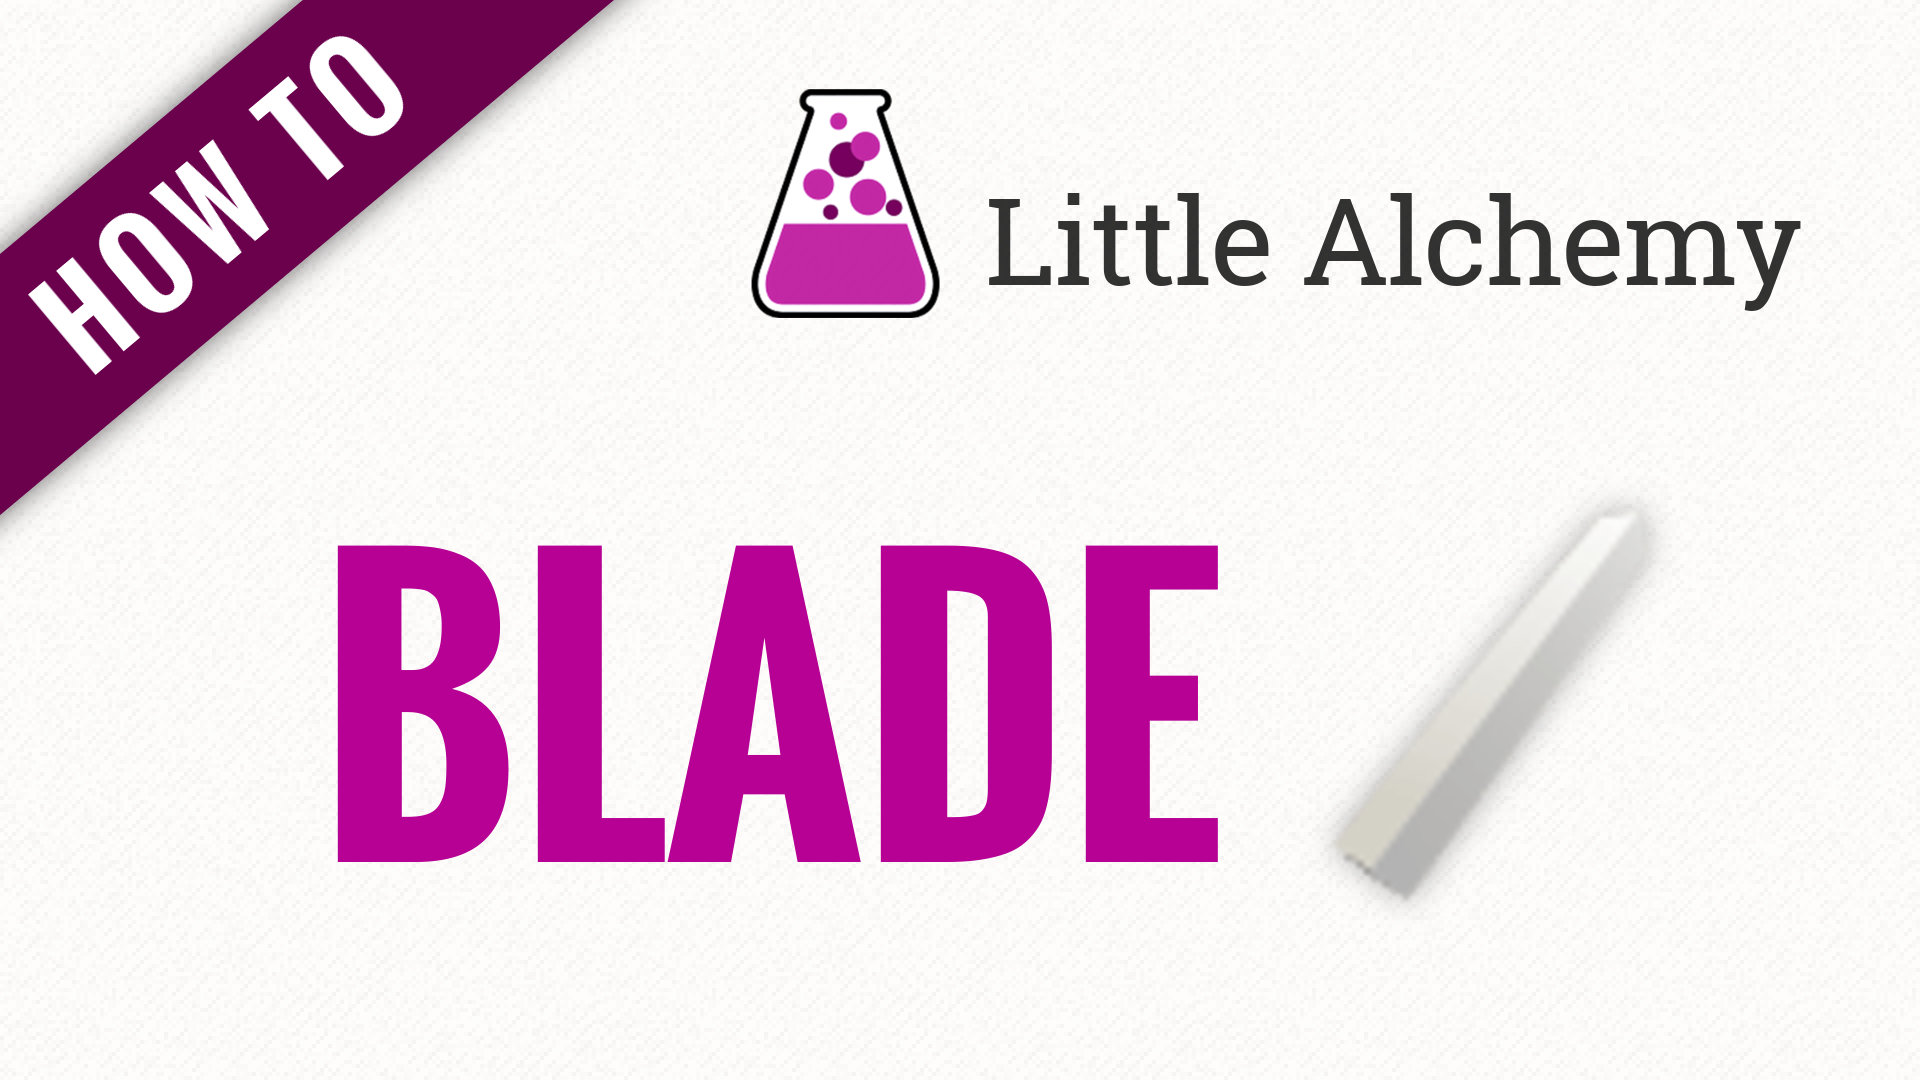 How To Make Blade In Little Alchemy